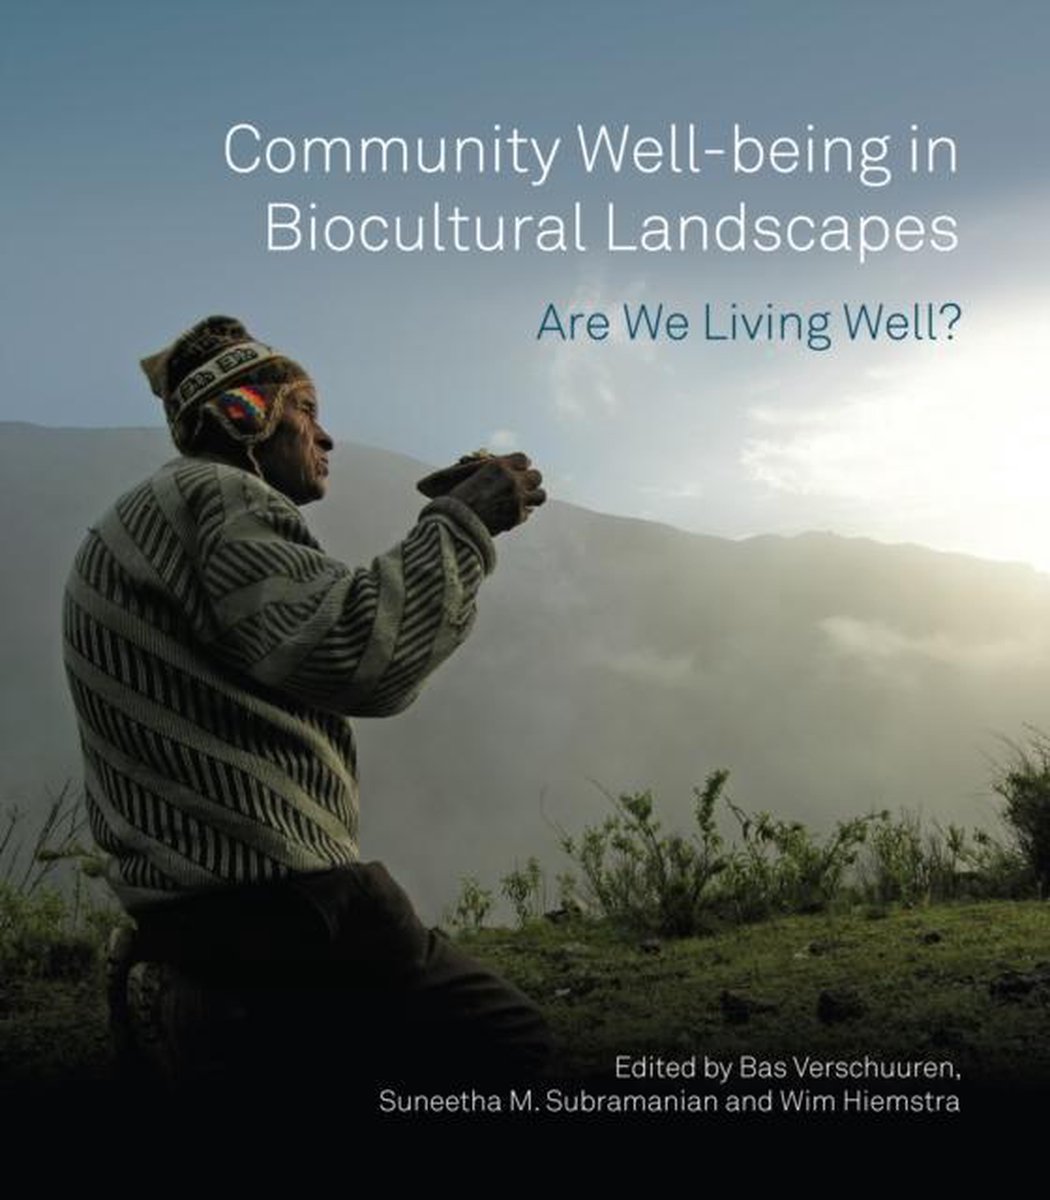 Community Well-Being in Biocultural Landscapes